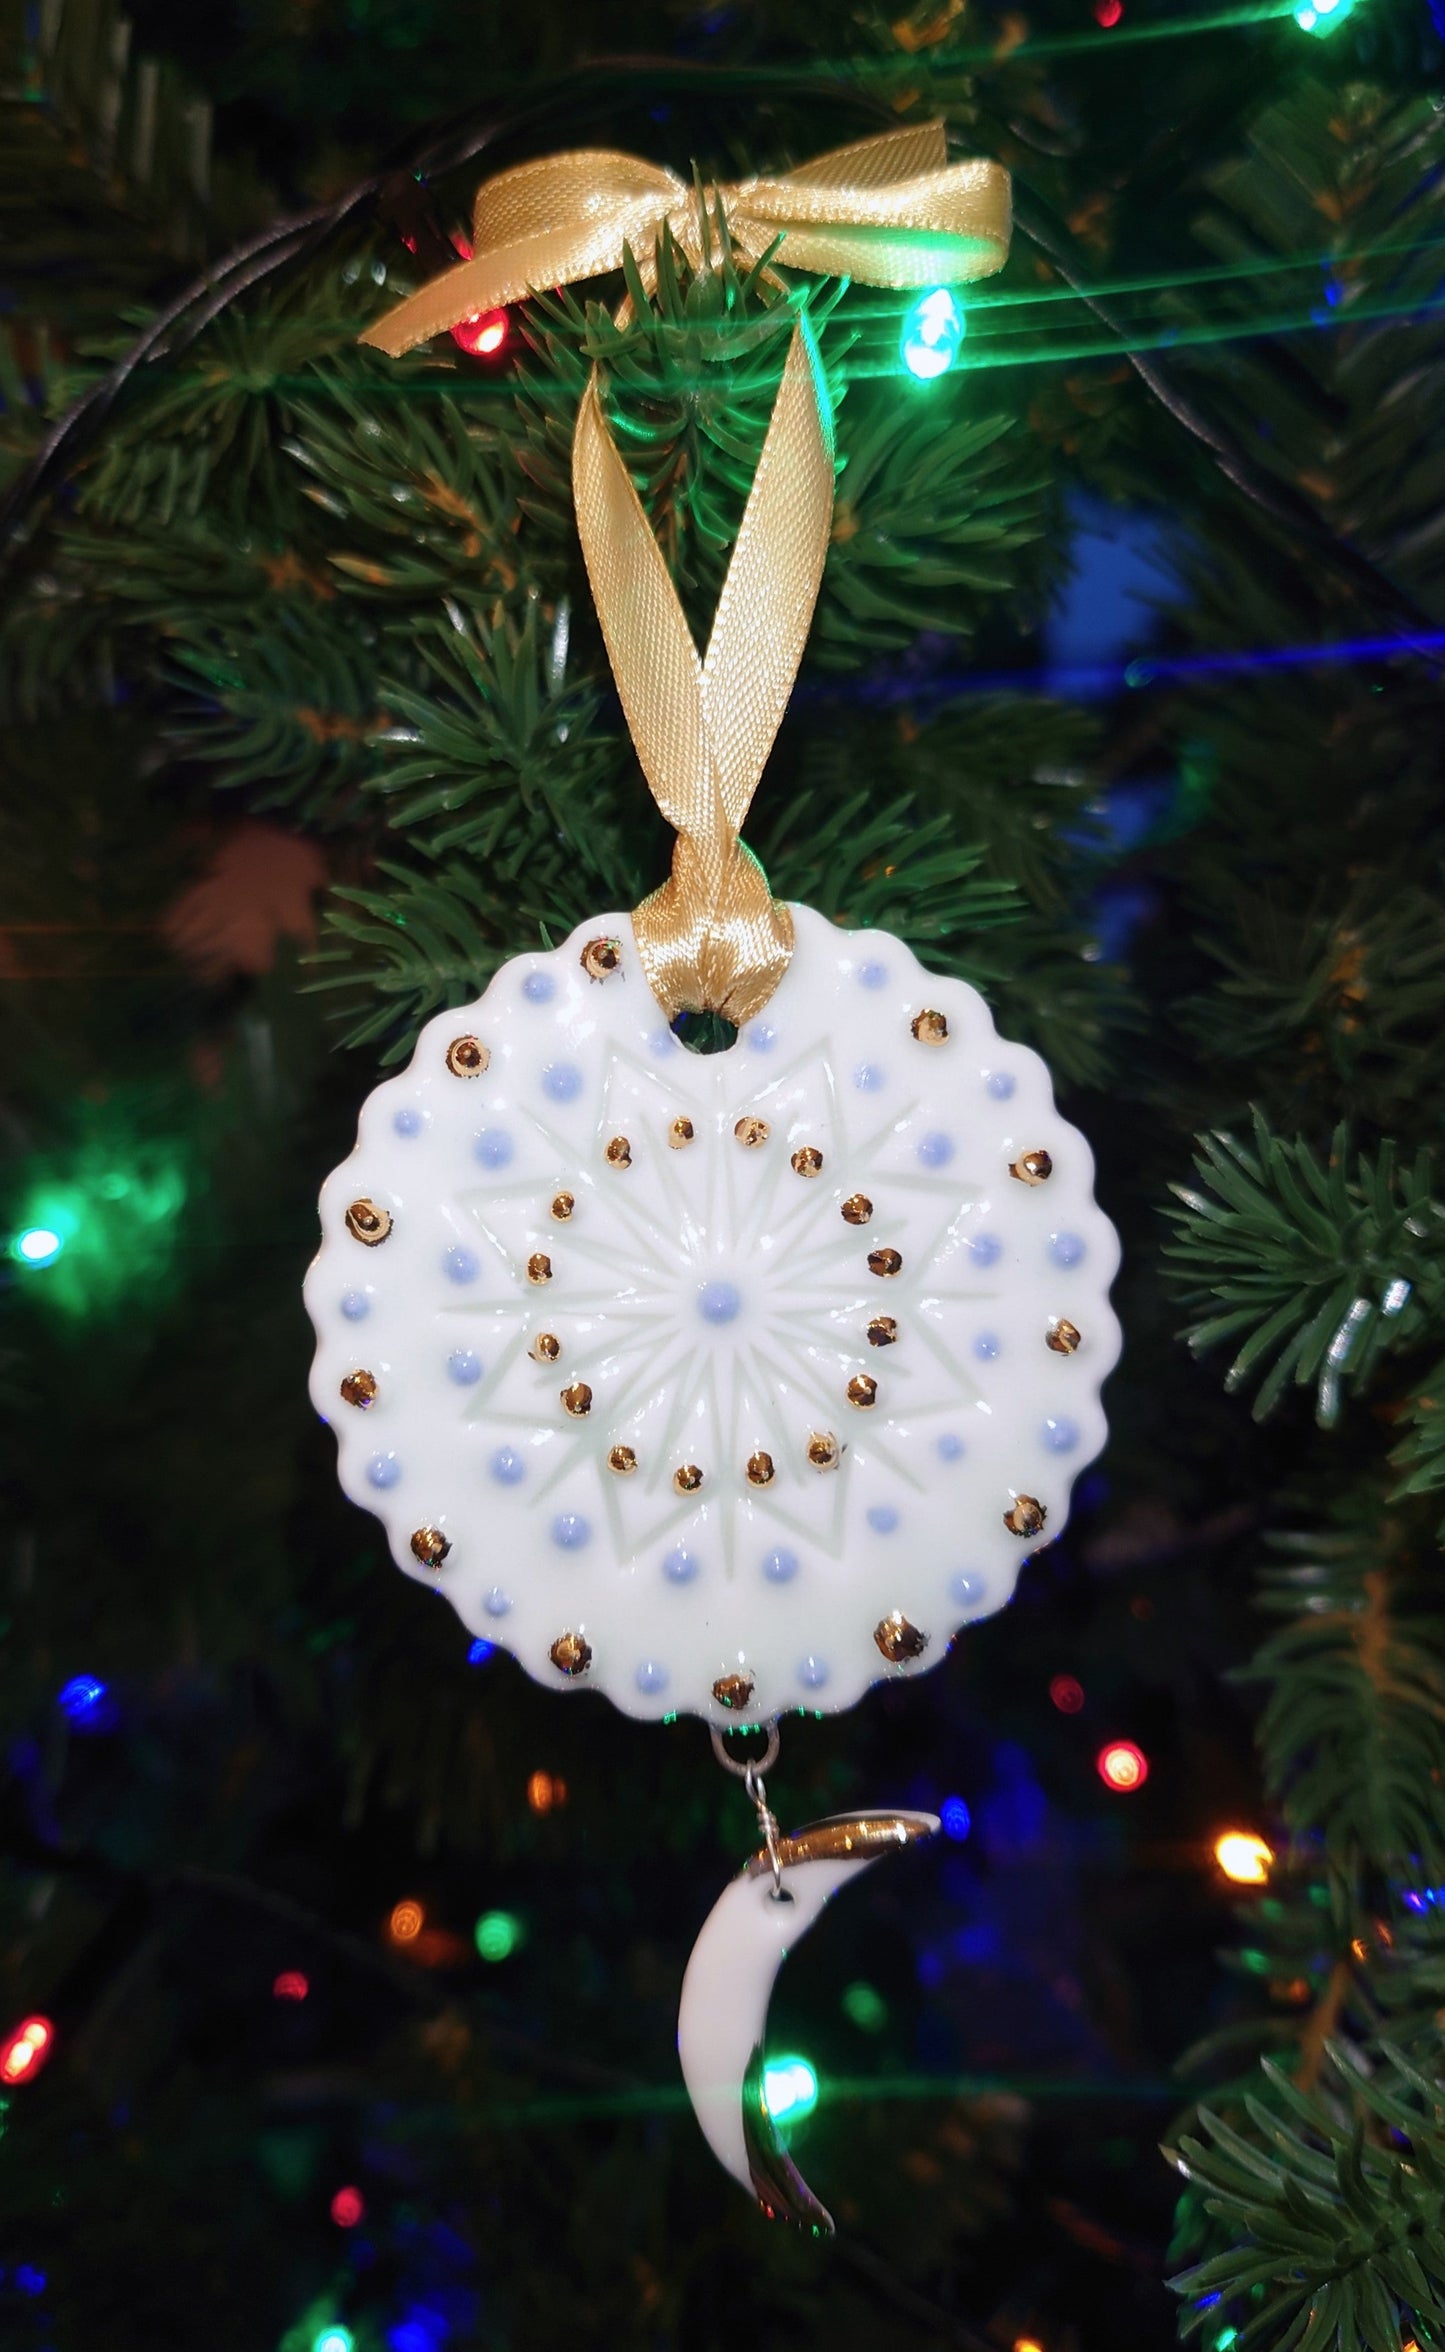 Porcelain Decorations with 24 Carat Gold Lustre and Dangling Charm